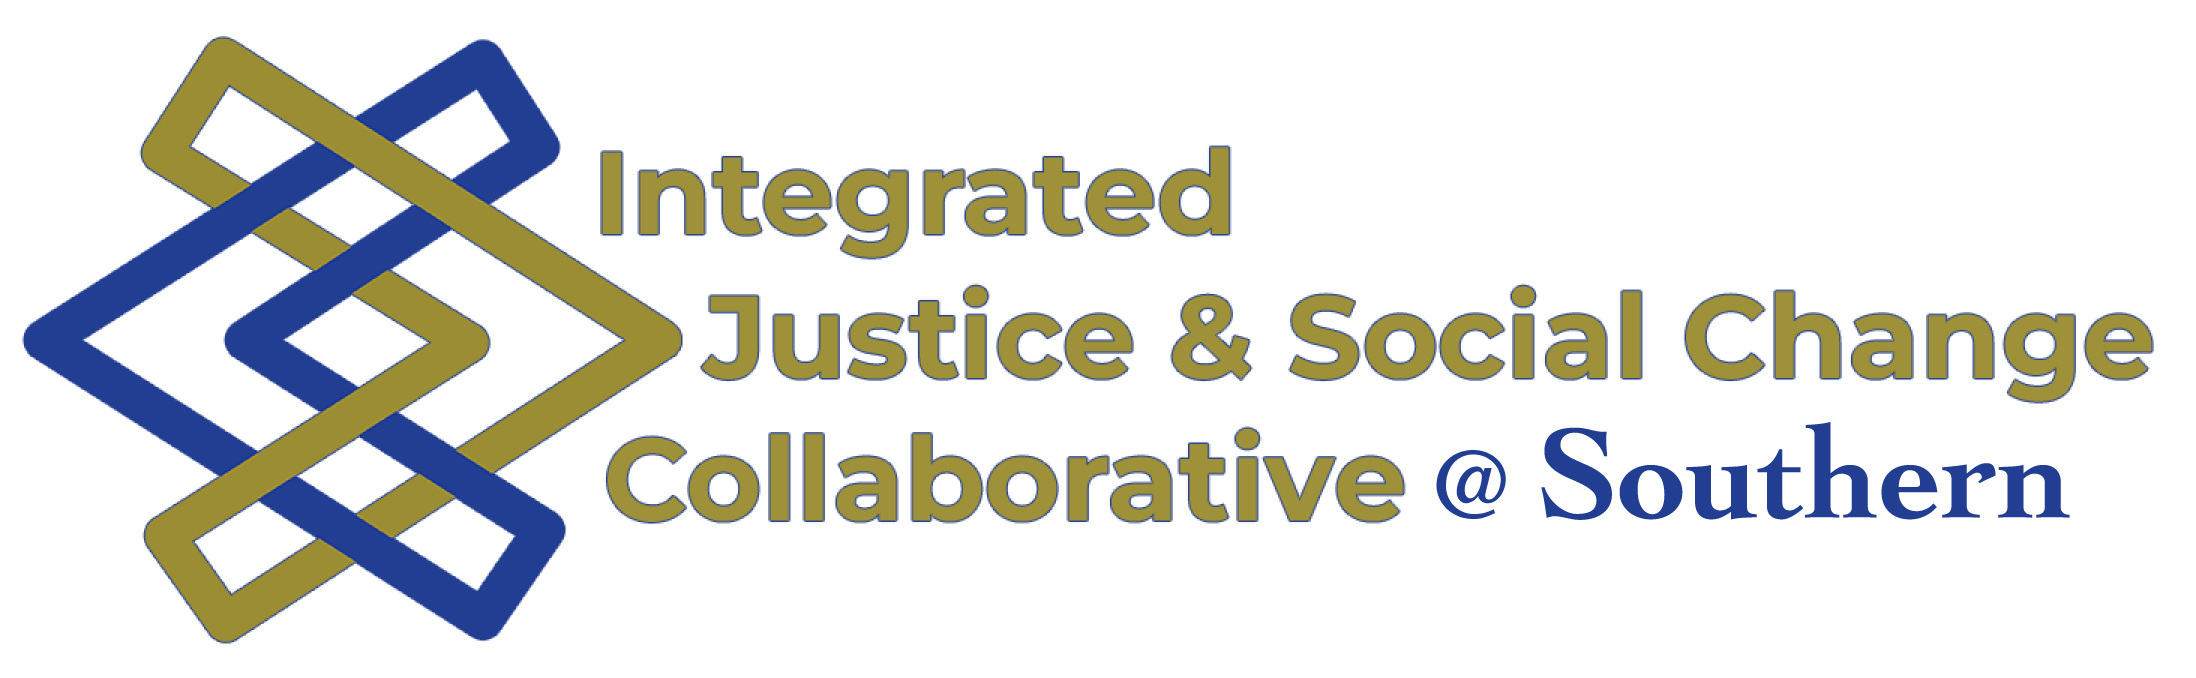 Integrated Justice and Social Change Collaborative